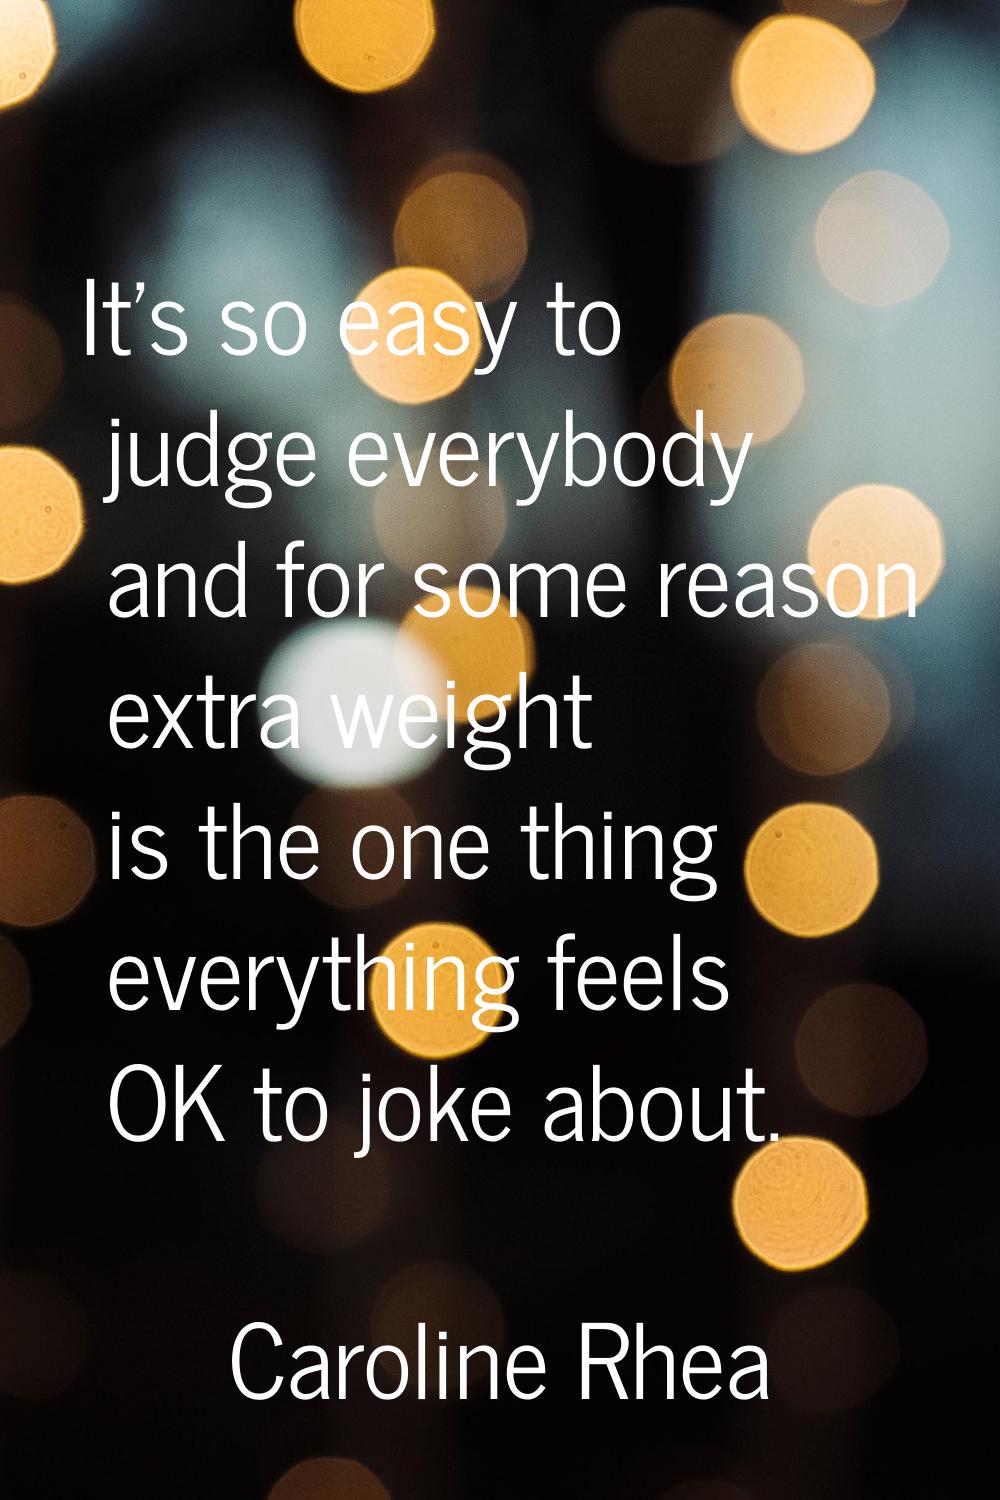 It's so easy to judge everybody and for some reason extra weight is the one thing everything feels 